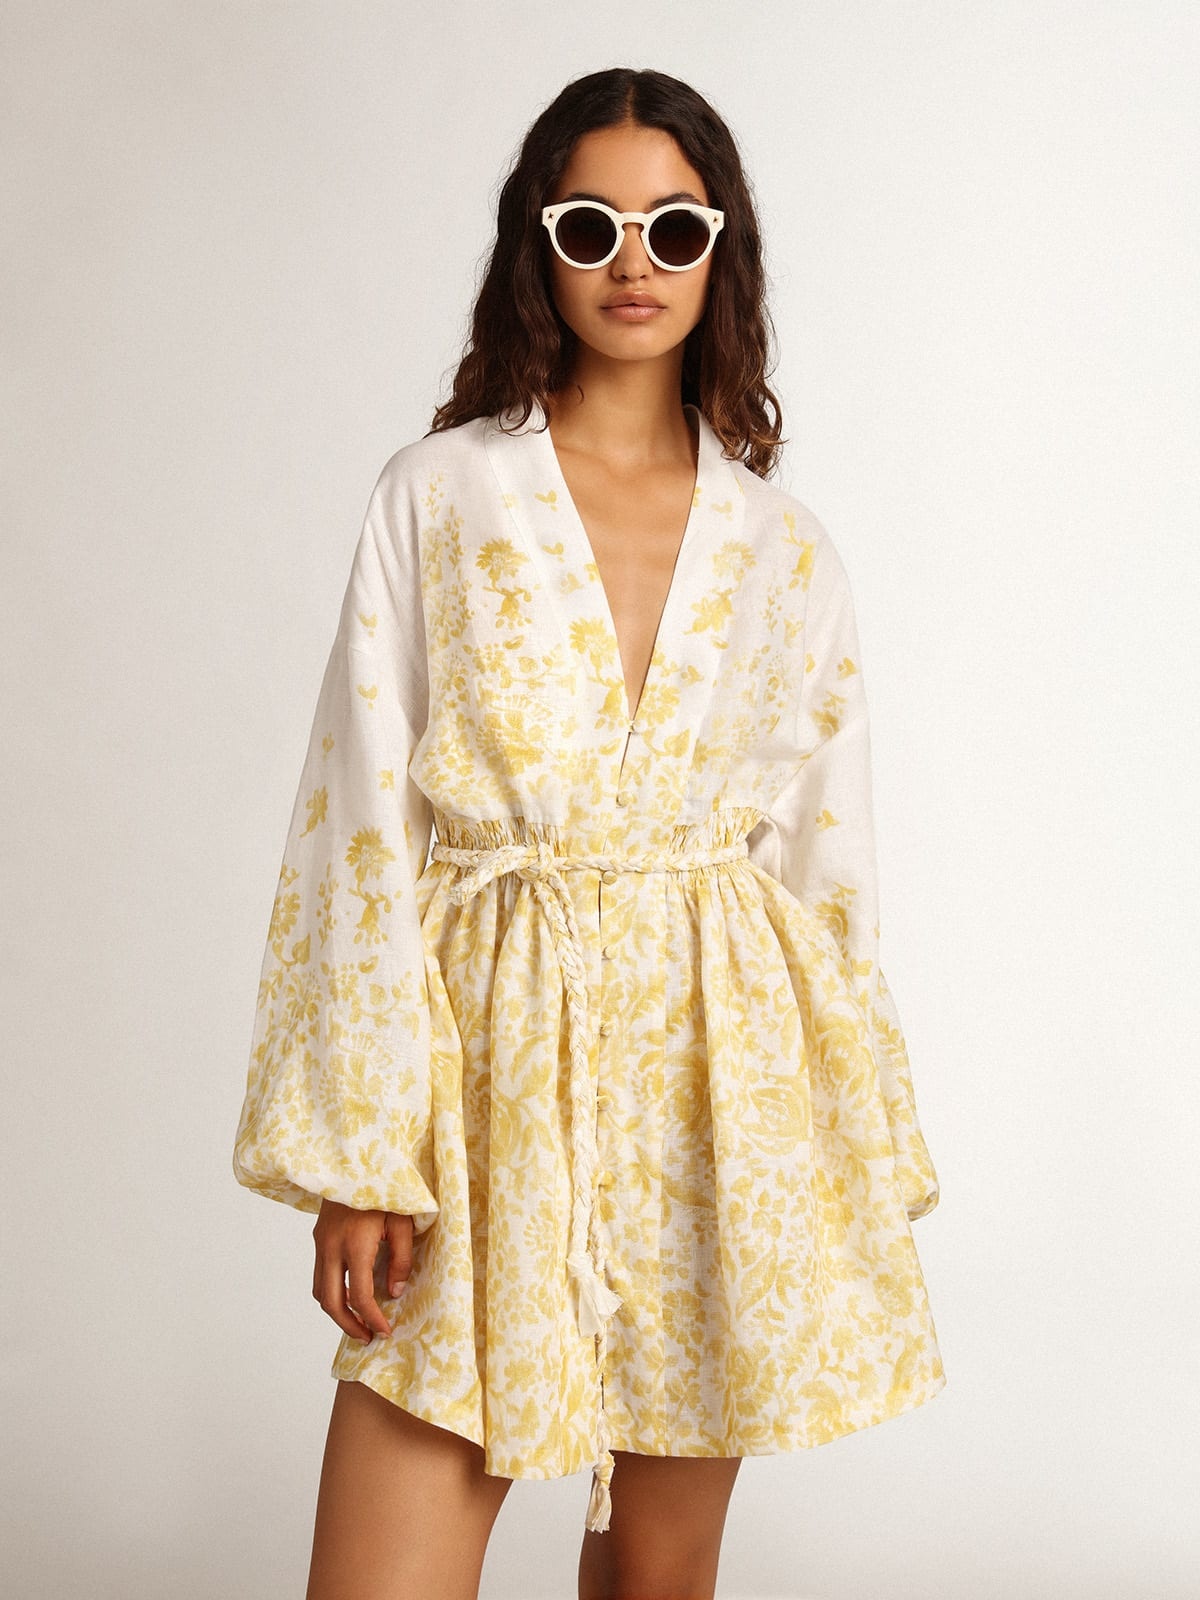 Resort Collection Mini Dress in linen with lemon yellow print - 2